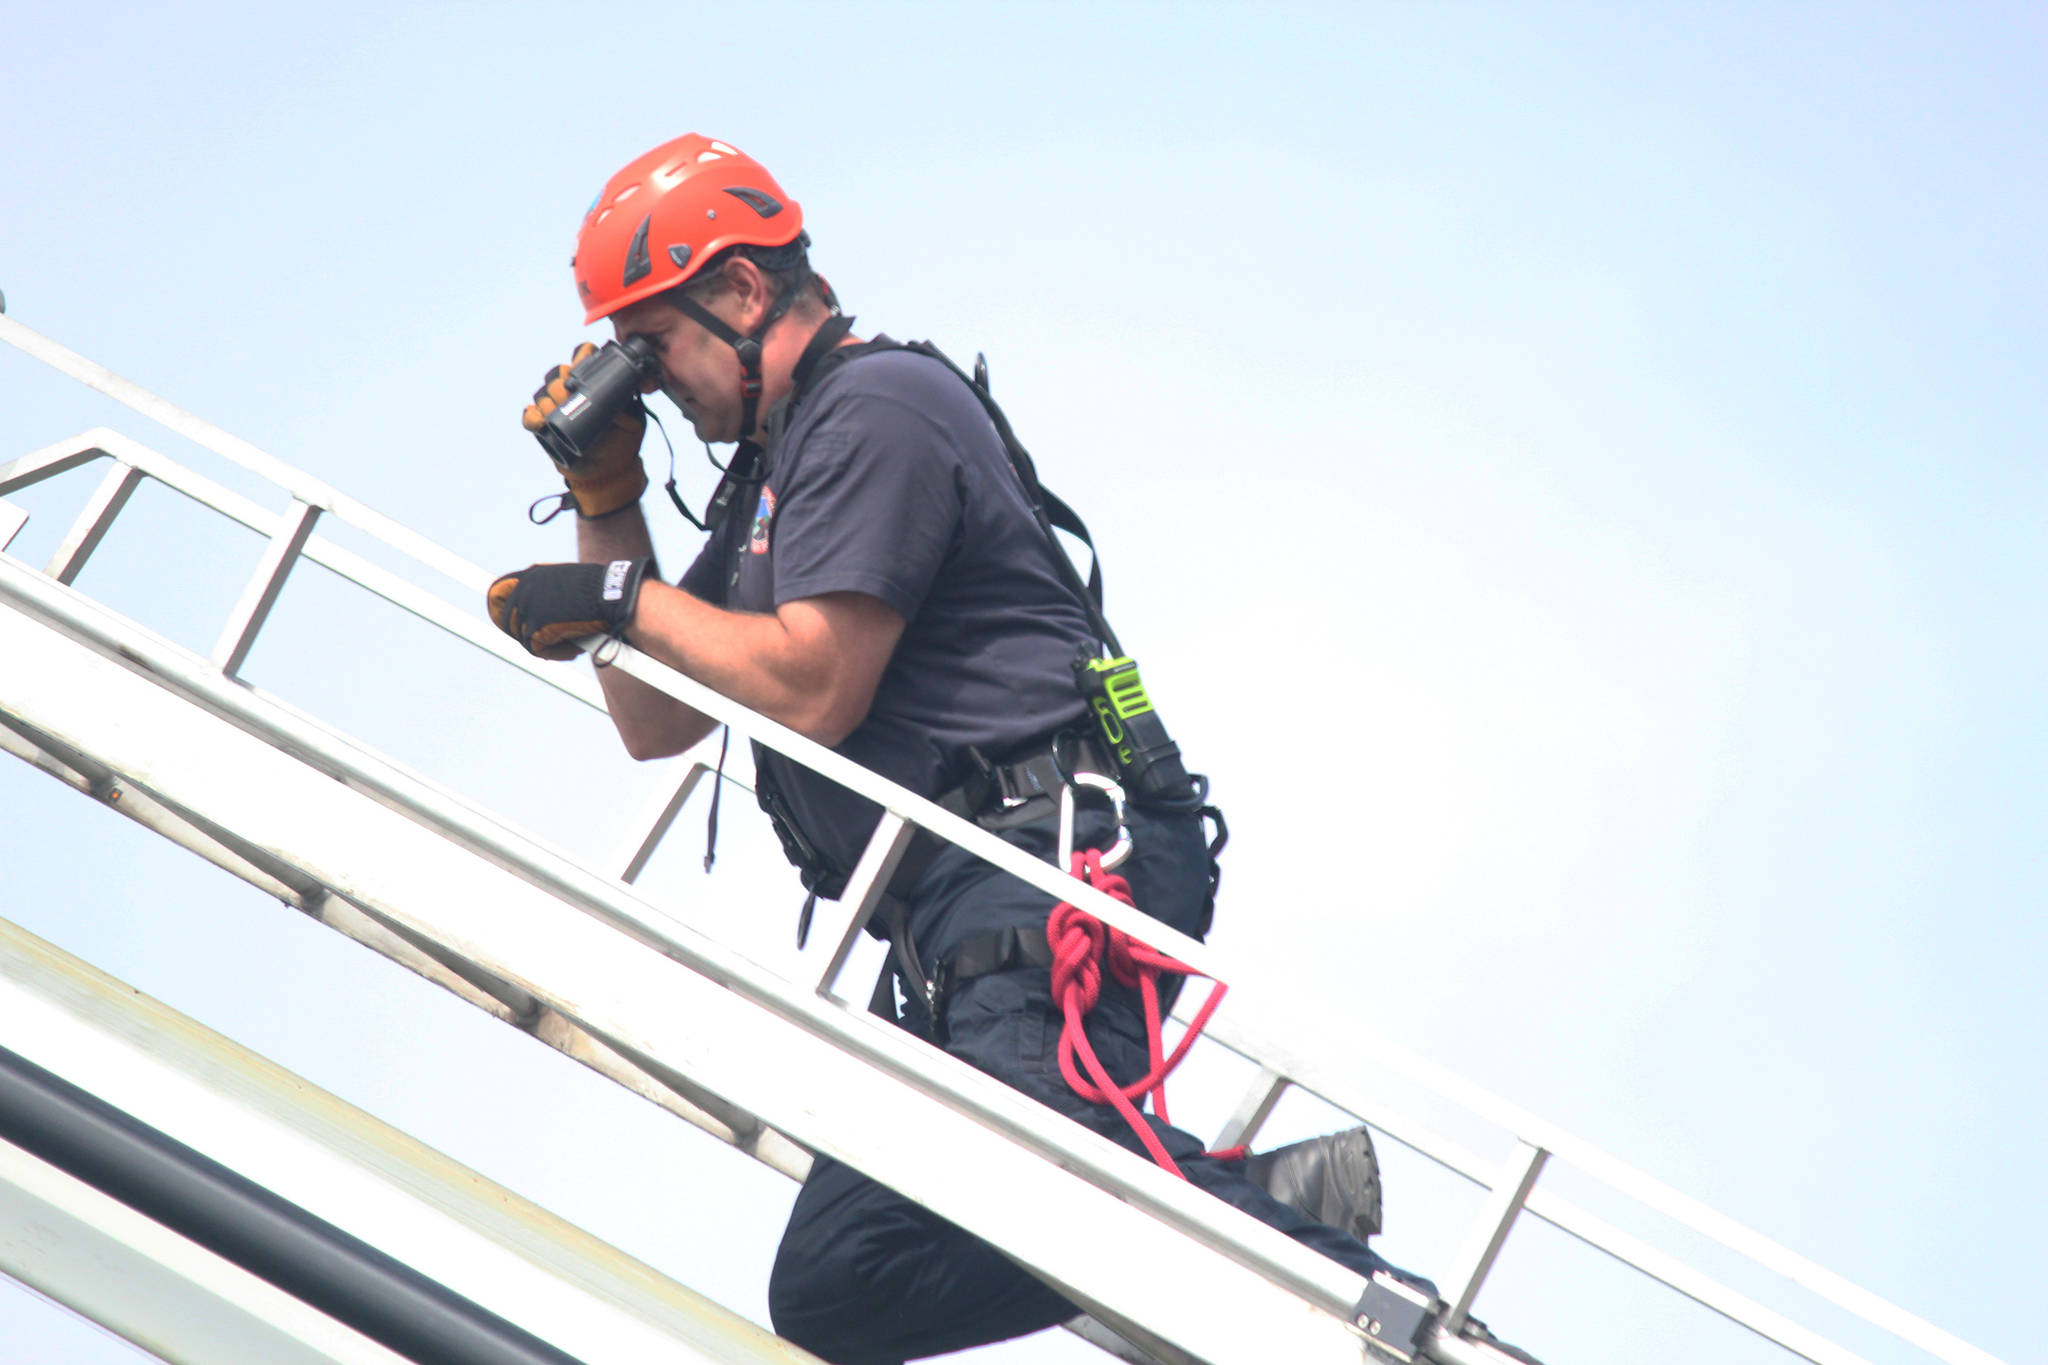 Joe Sallee, Deputy Chief at Kachemak Emergency Services, uses binoculars at the end of a ladder extended from the KES ladder truck to search the slope near Baycrest Overlook on Monday, July 24, 2017 in Homer, Alaska. First responders found a pickup truck that had fallen over the edge after hitting a guardrail, and searched for a possible victim until getting a report that the driver had crashed several days earlier and had walked away uninjured. Photo by Megan Pacer/Homer News